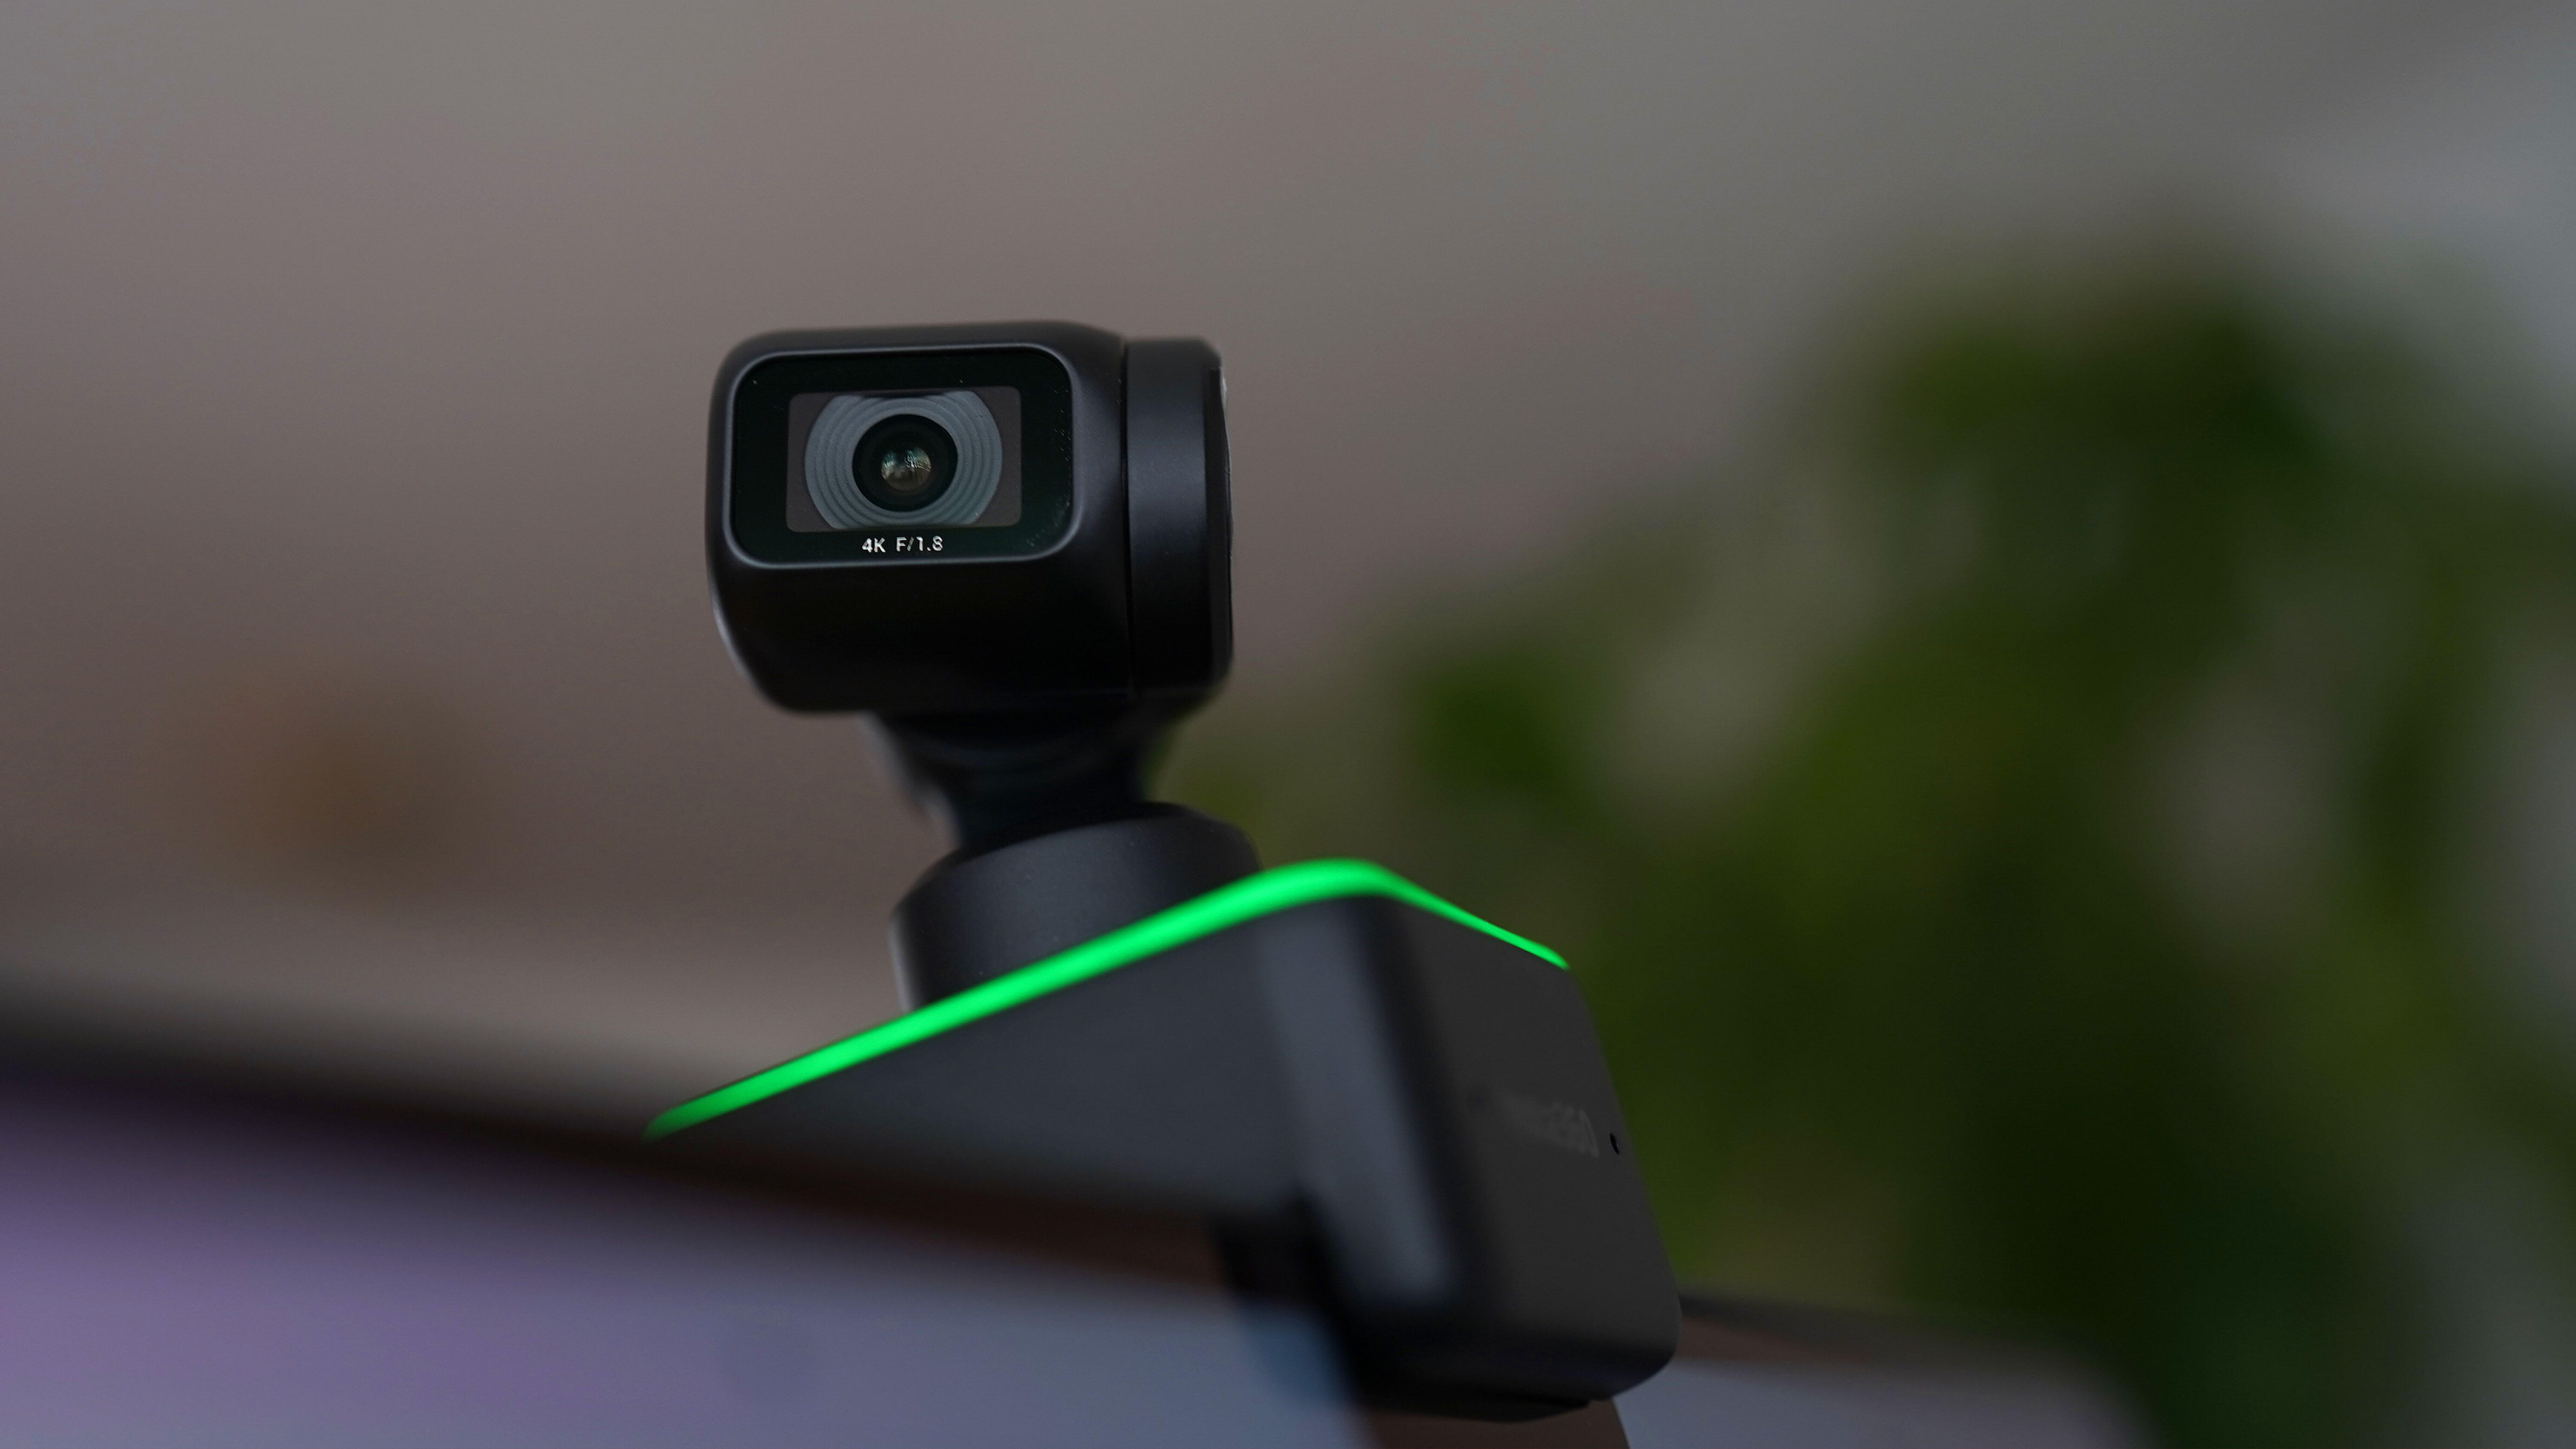 Insta360 Link review: This new 4K webcam means business